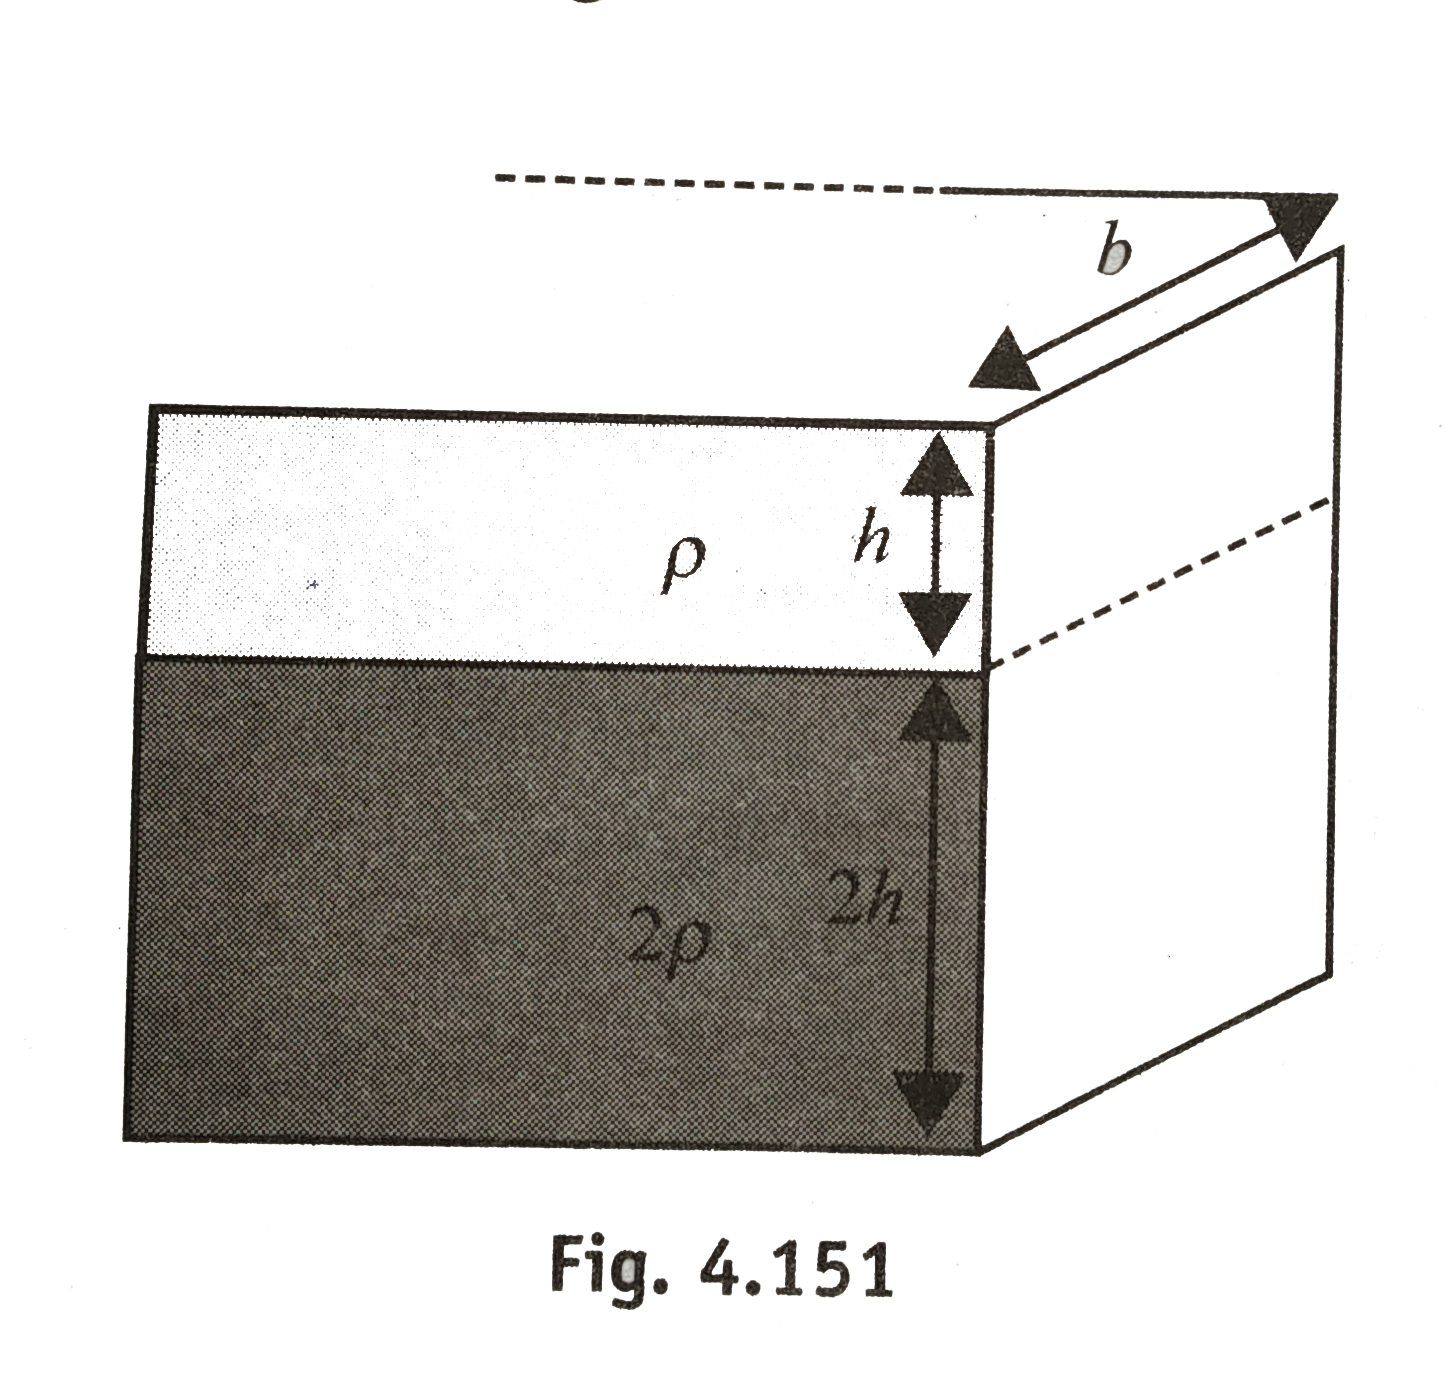 Two immiscible liquids of densities rho and 2rho and thickness (heights) h and 2h, respectively, push a vertical plate. Find the total side thrust given by the liquids on the vertical plate.